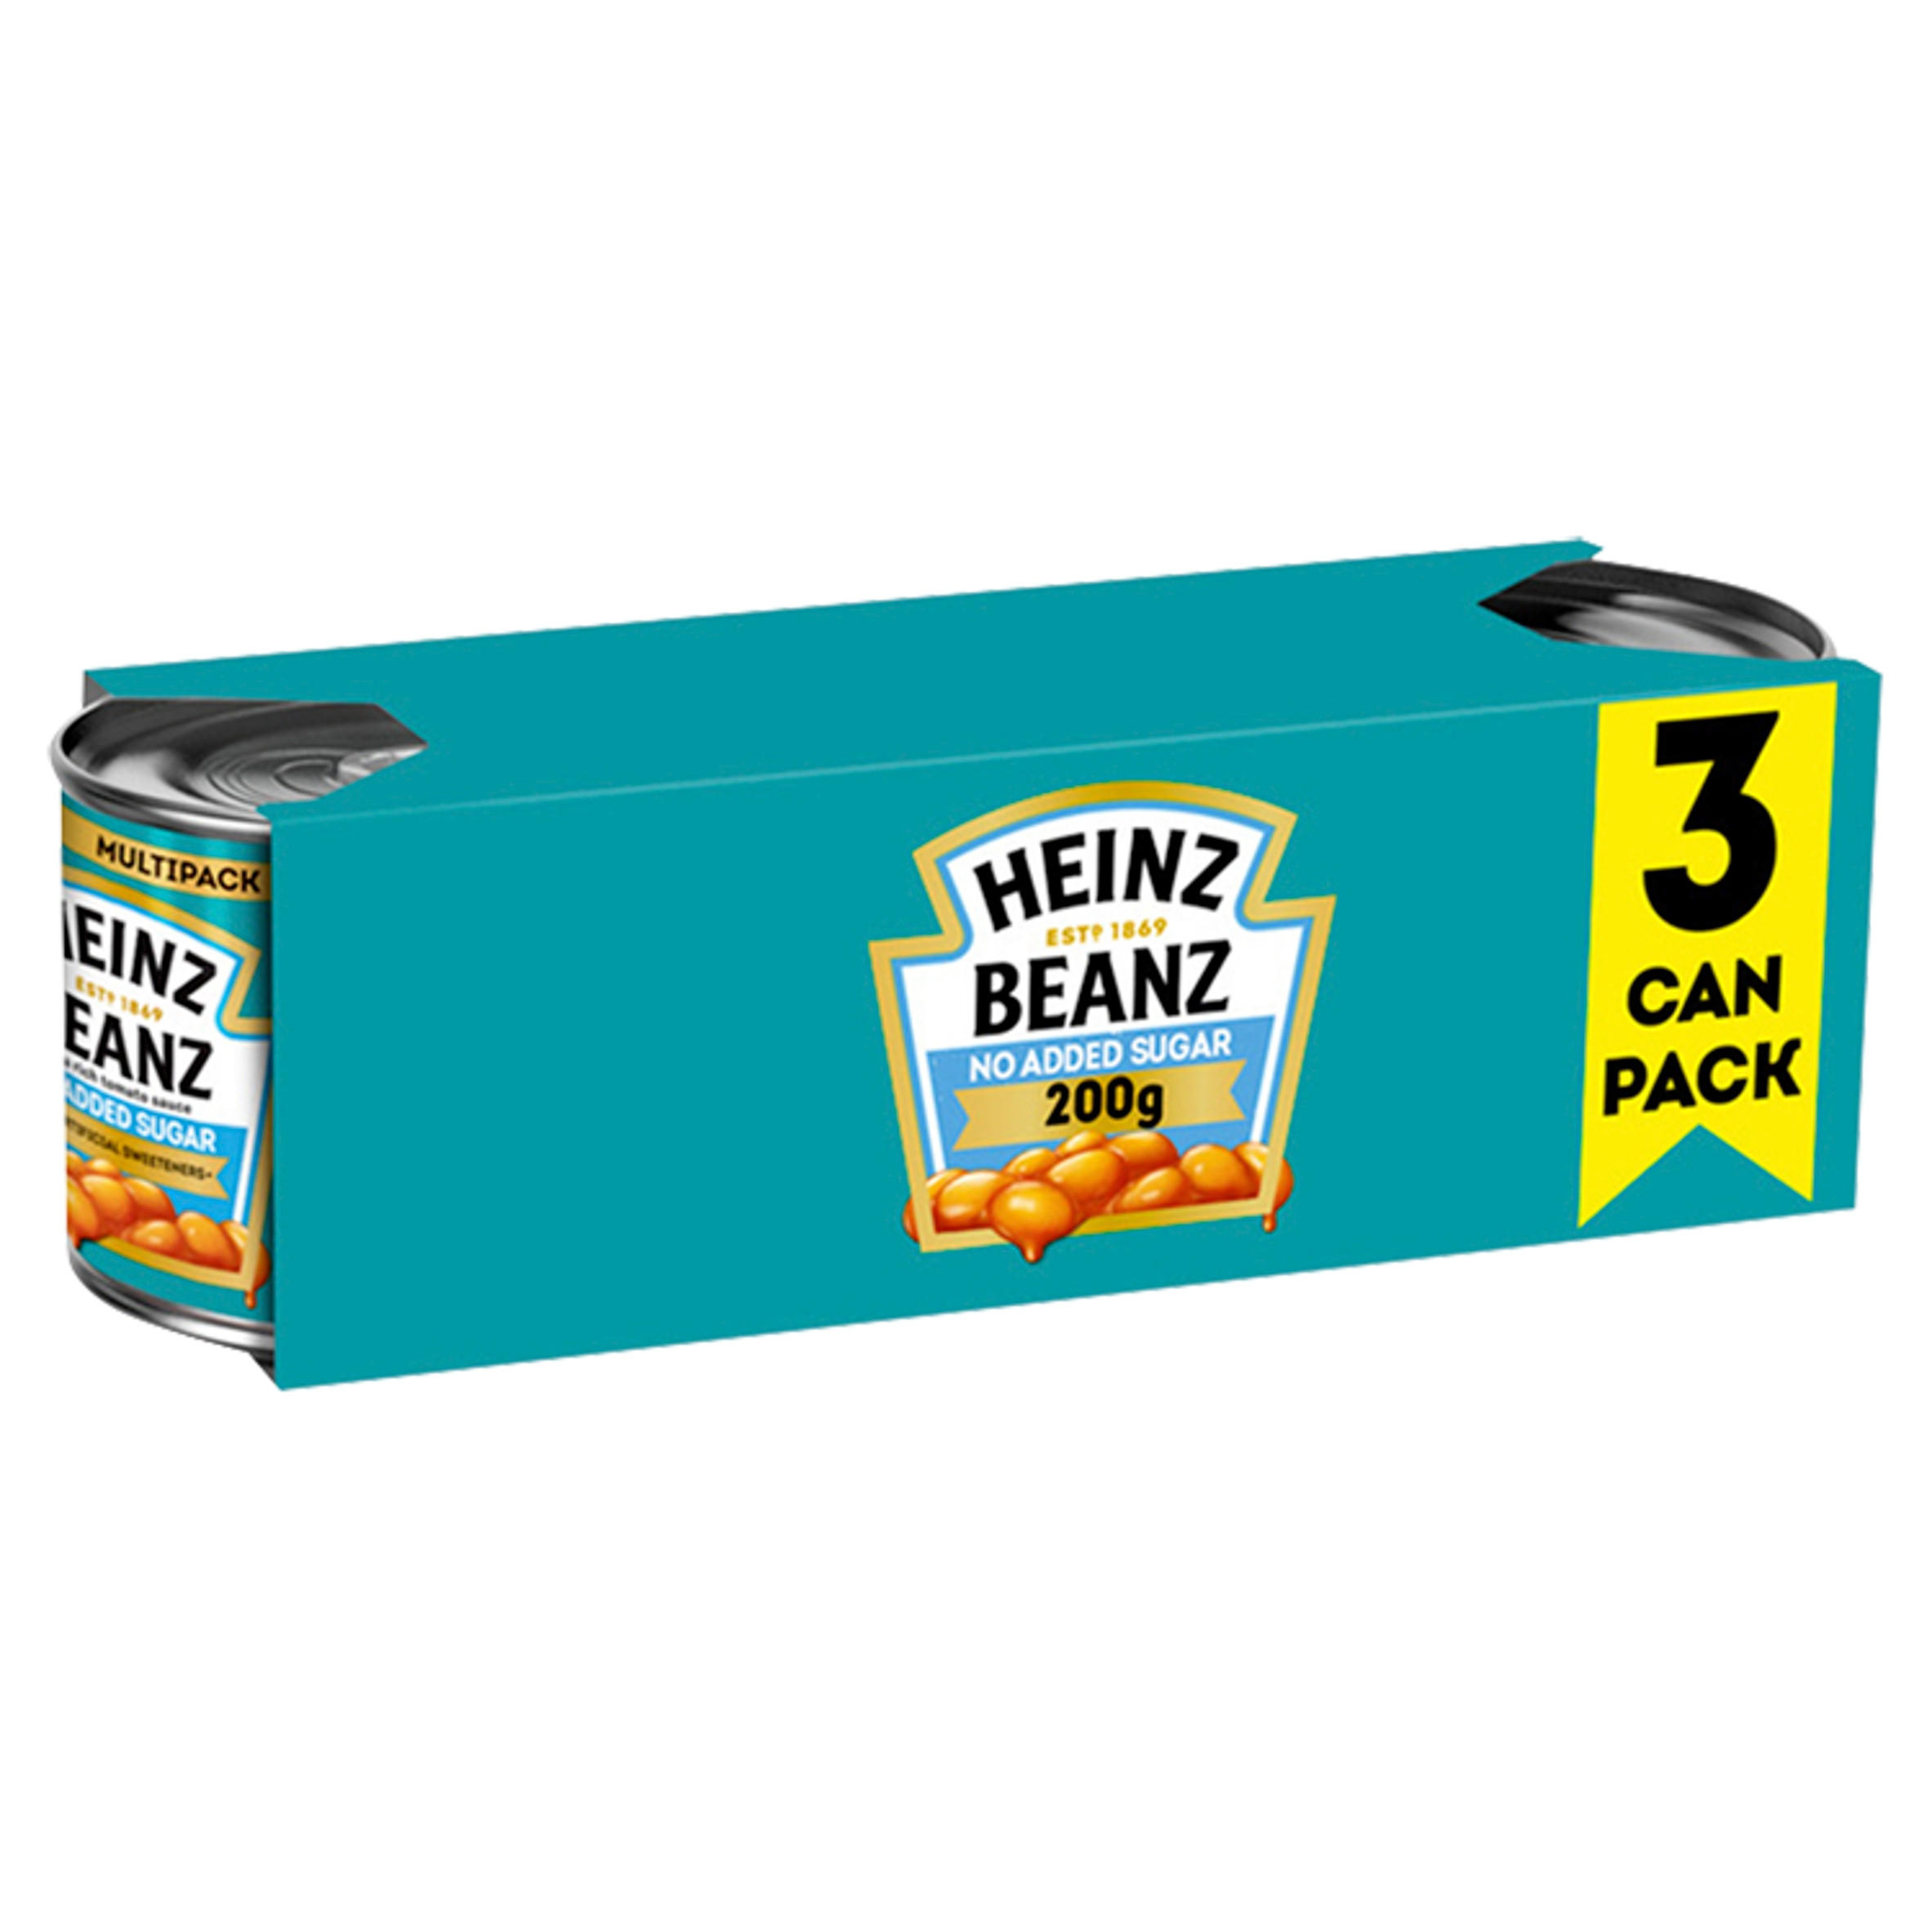 Heinz No Added Sugar Tinned Baked Beans in Tomato Sauce 3 x 200g ...